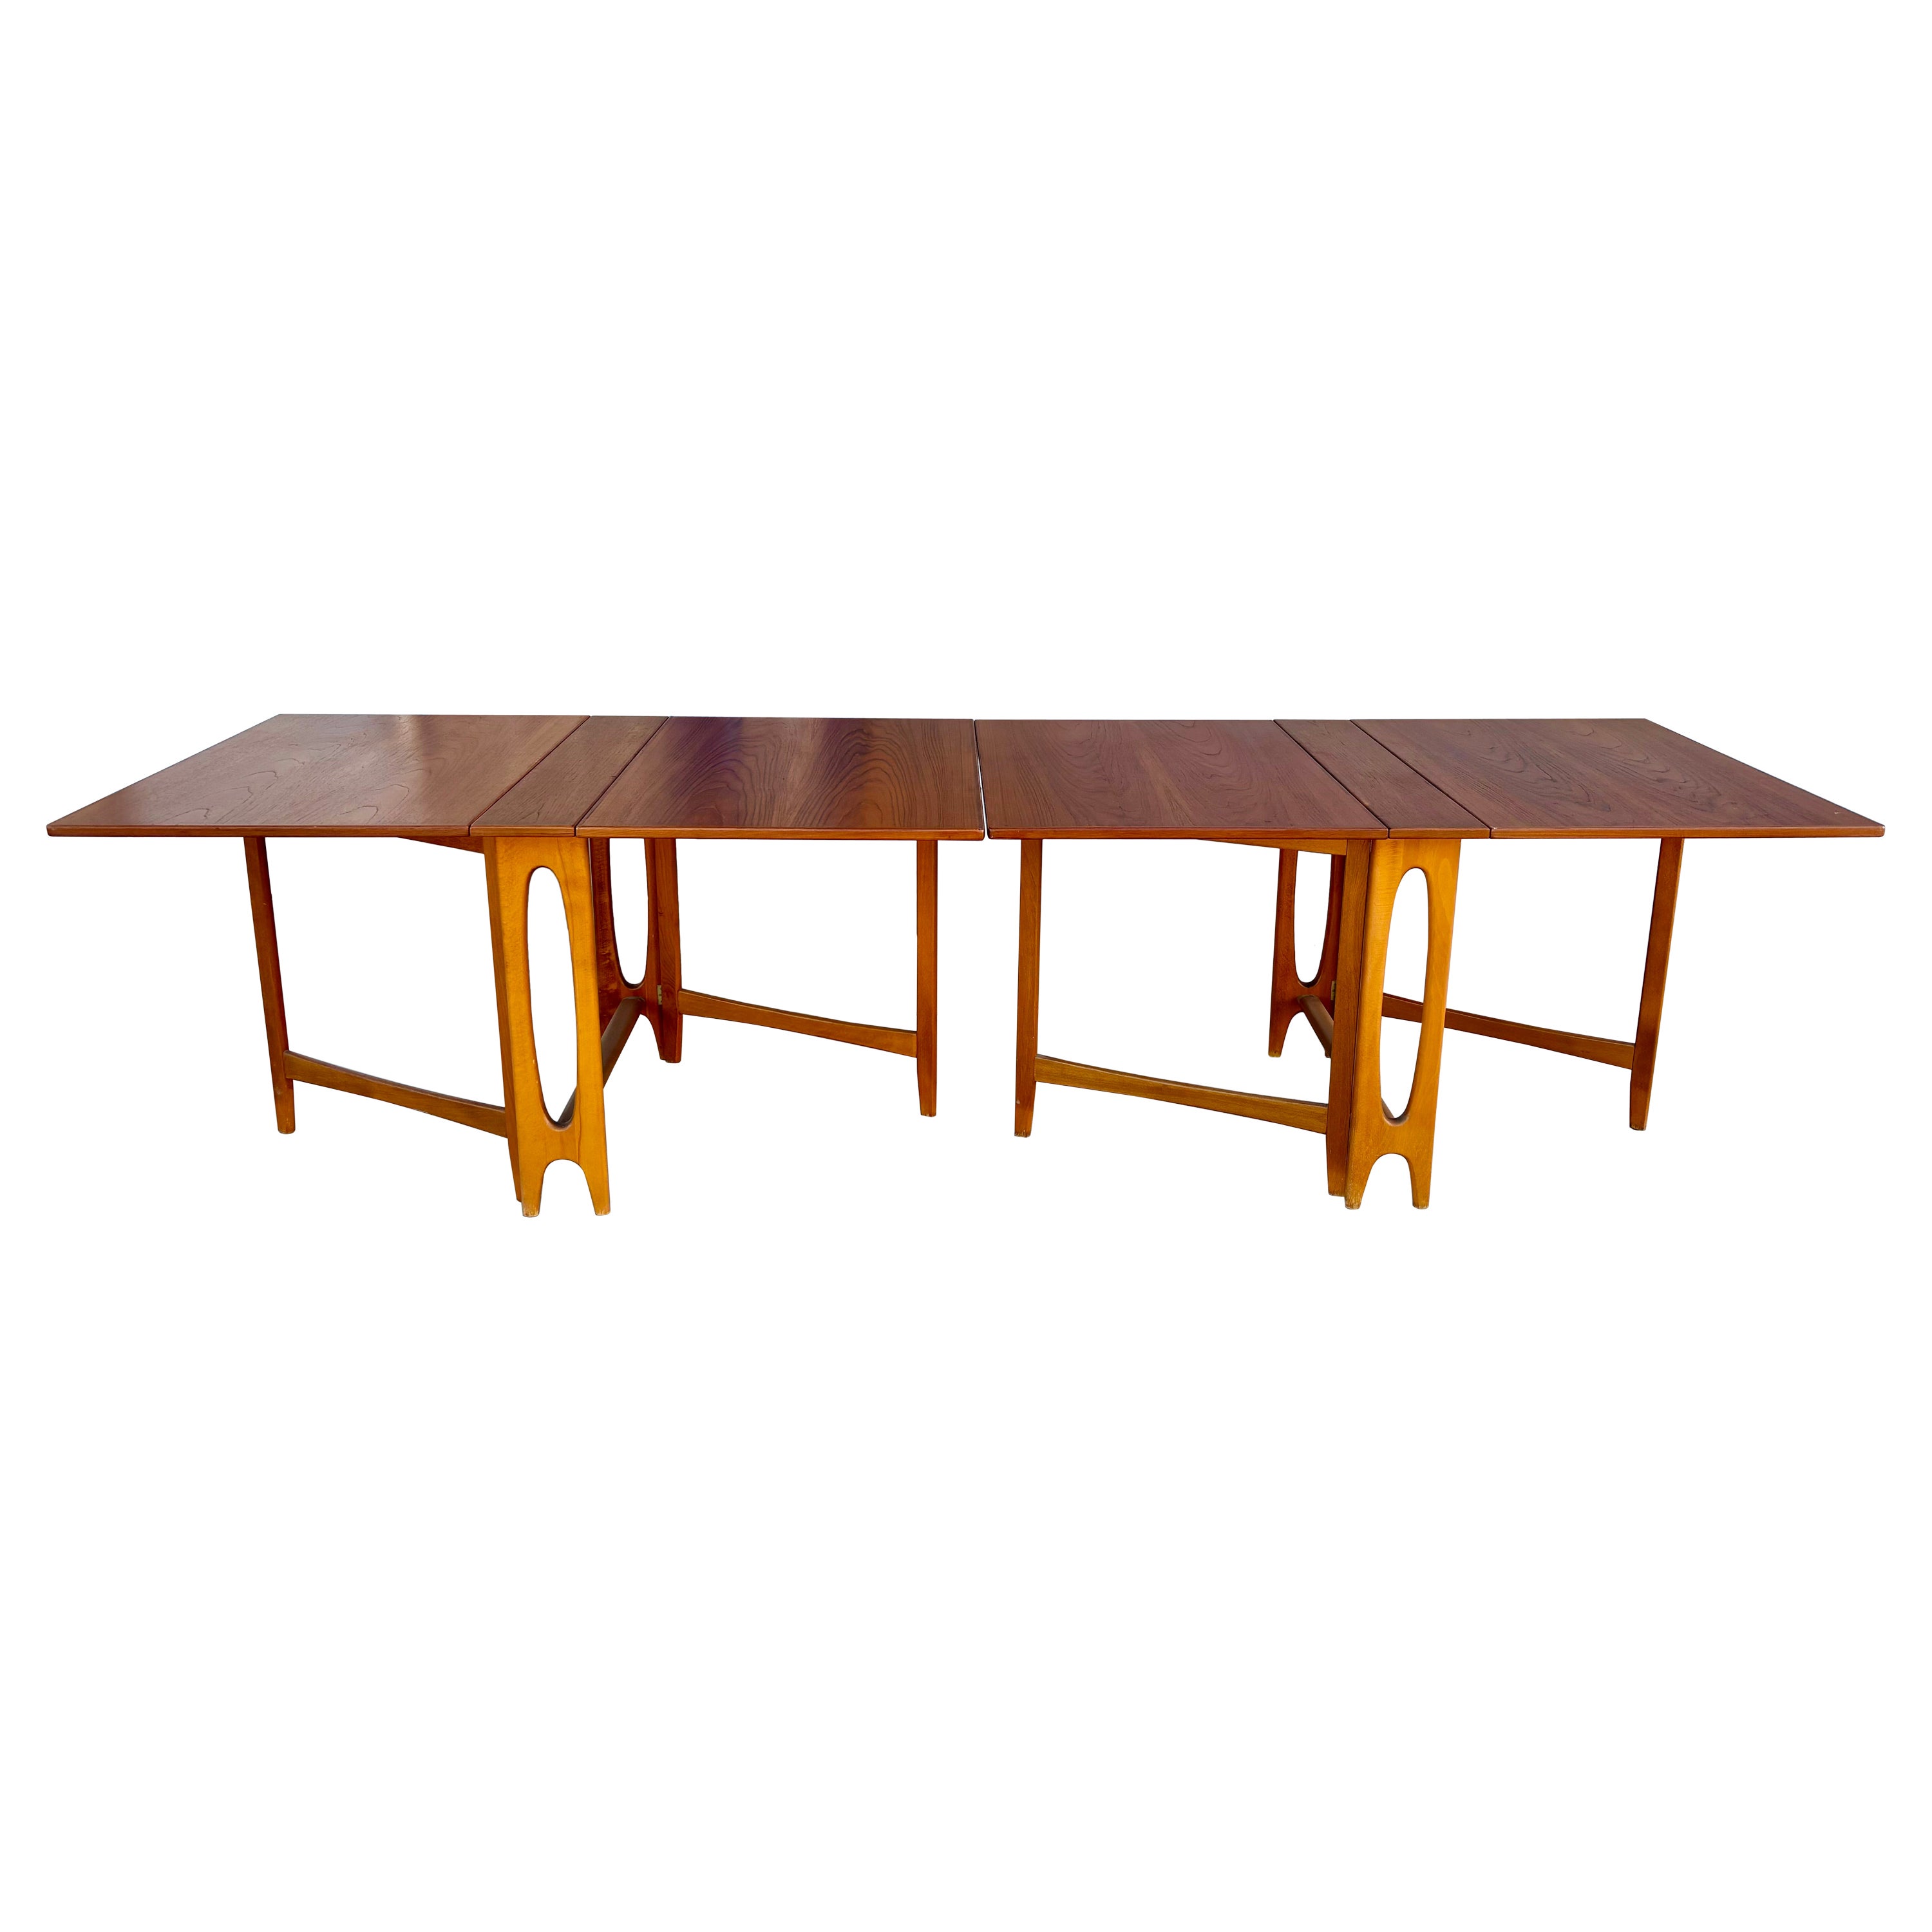 1970s Danish Modern Large Expanding Teak Dining Table - a Pair For Sale